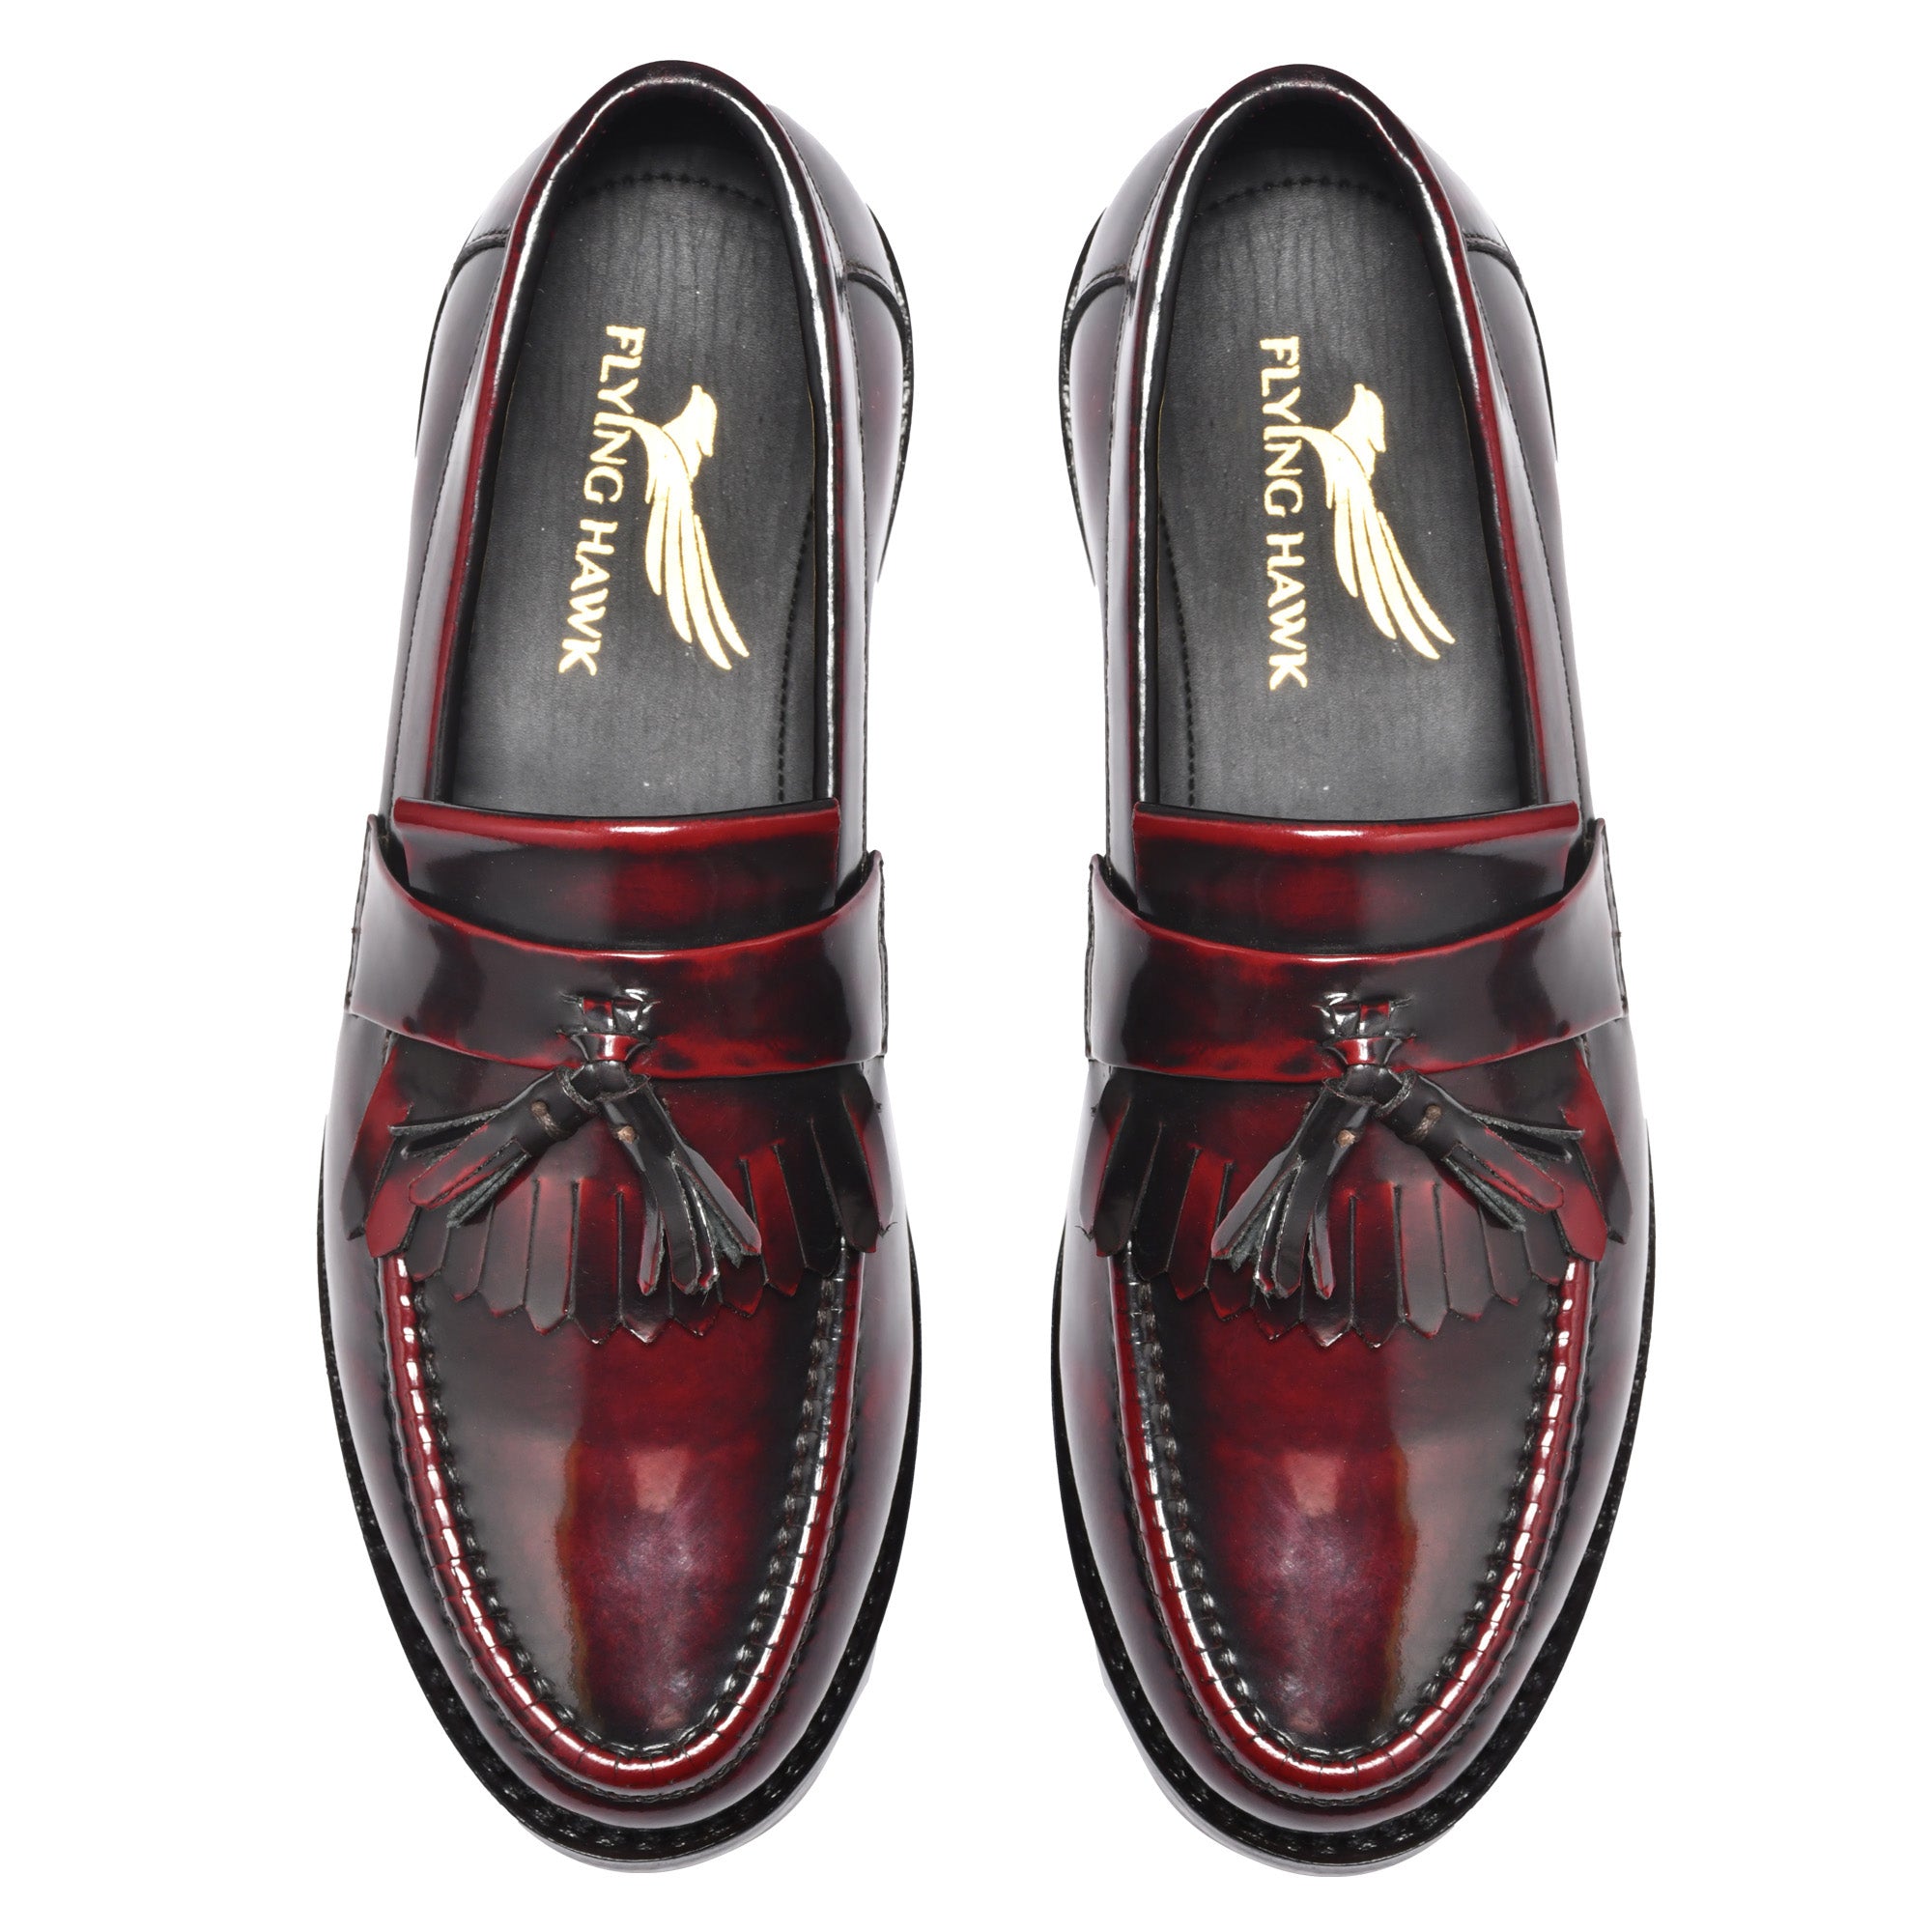 Charles Tussle Penny Loafer | Goodyear Welted Shoes